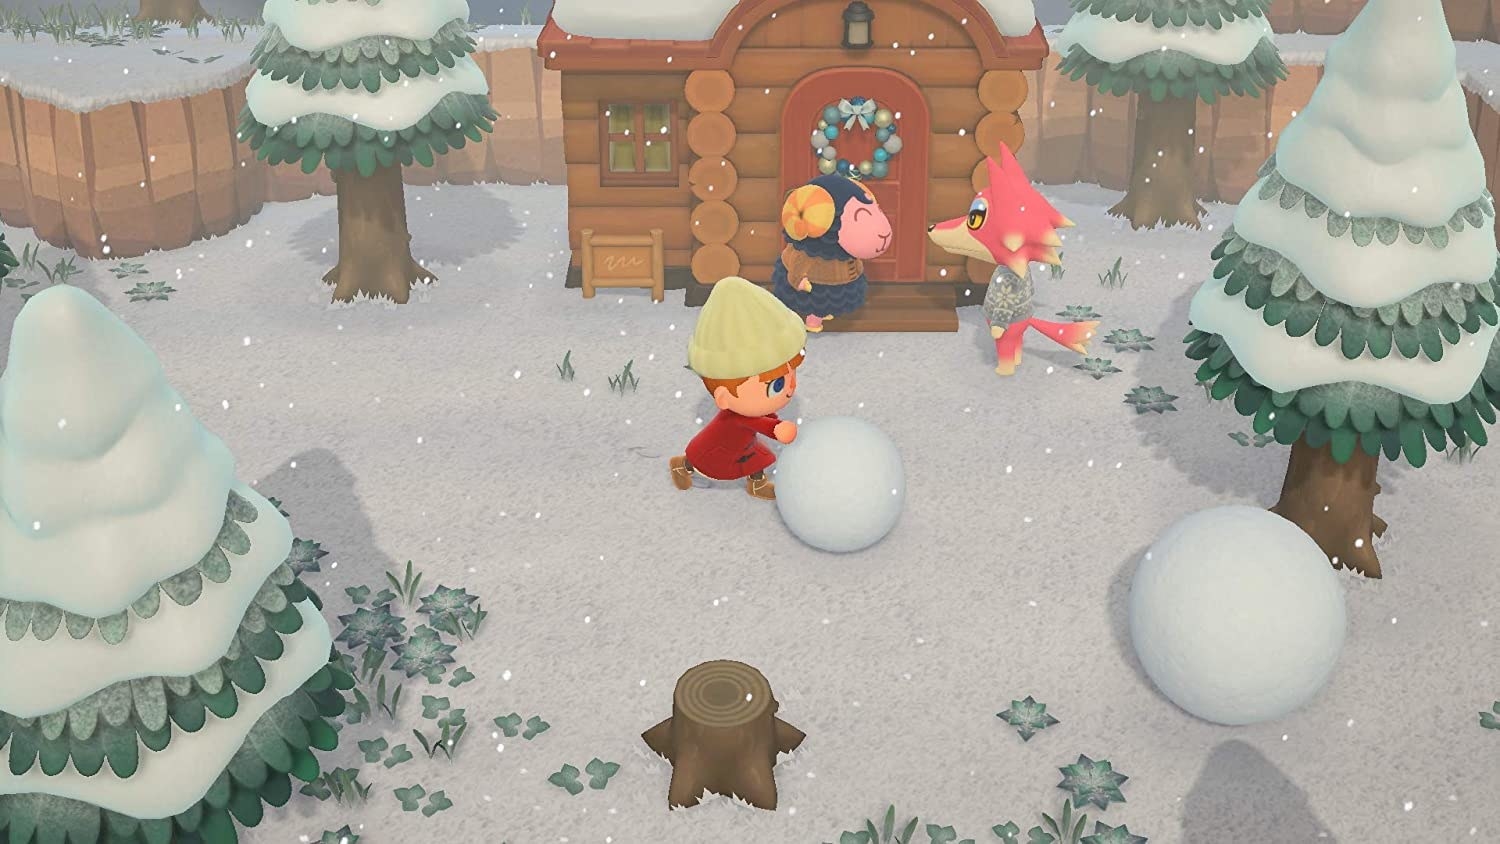 character building a snowman